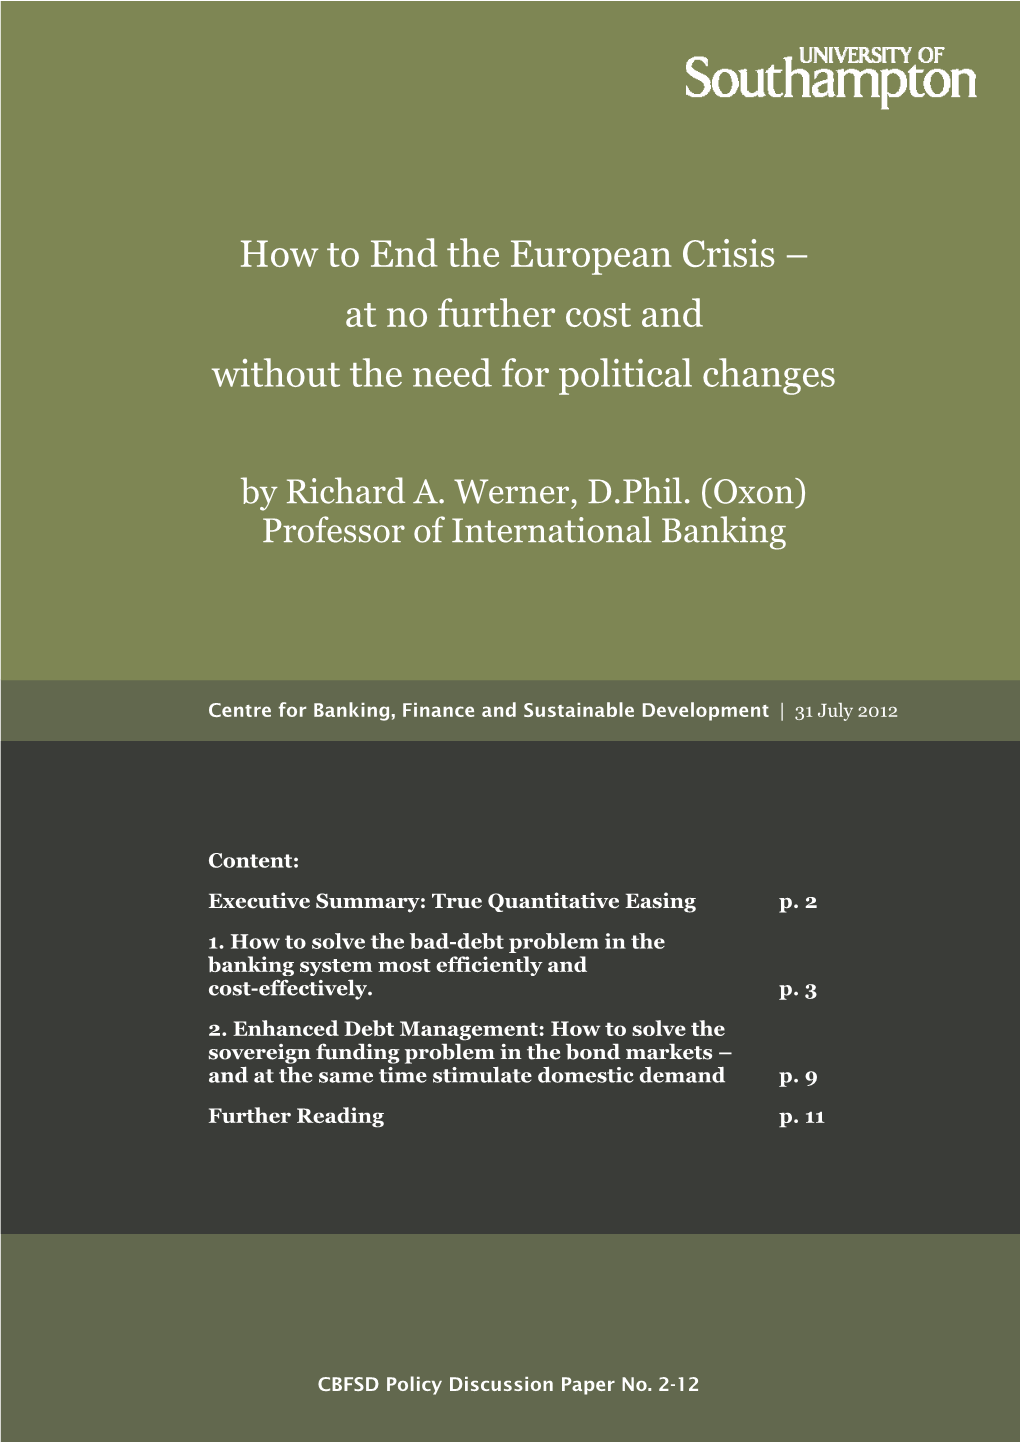 How to End the European Crisis – at No Further Cost and Without the Need for Political Changes